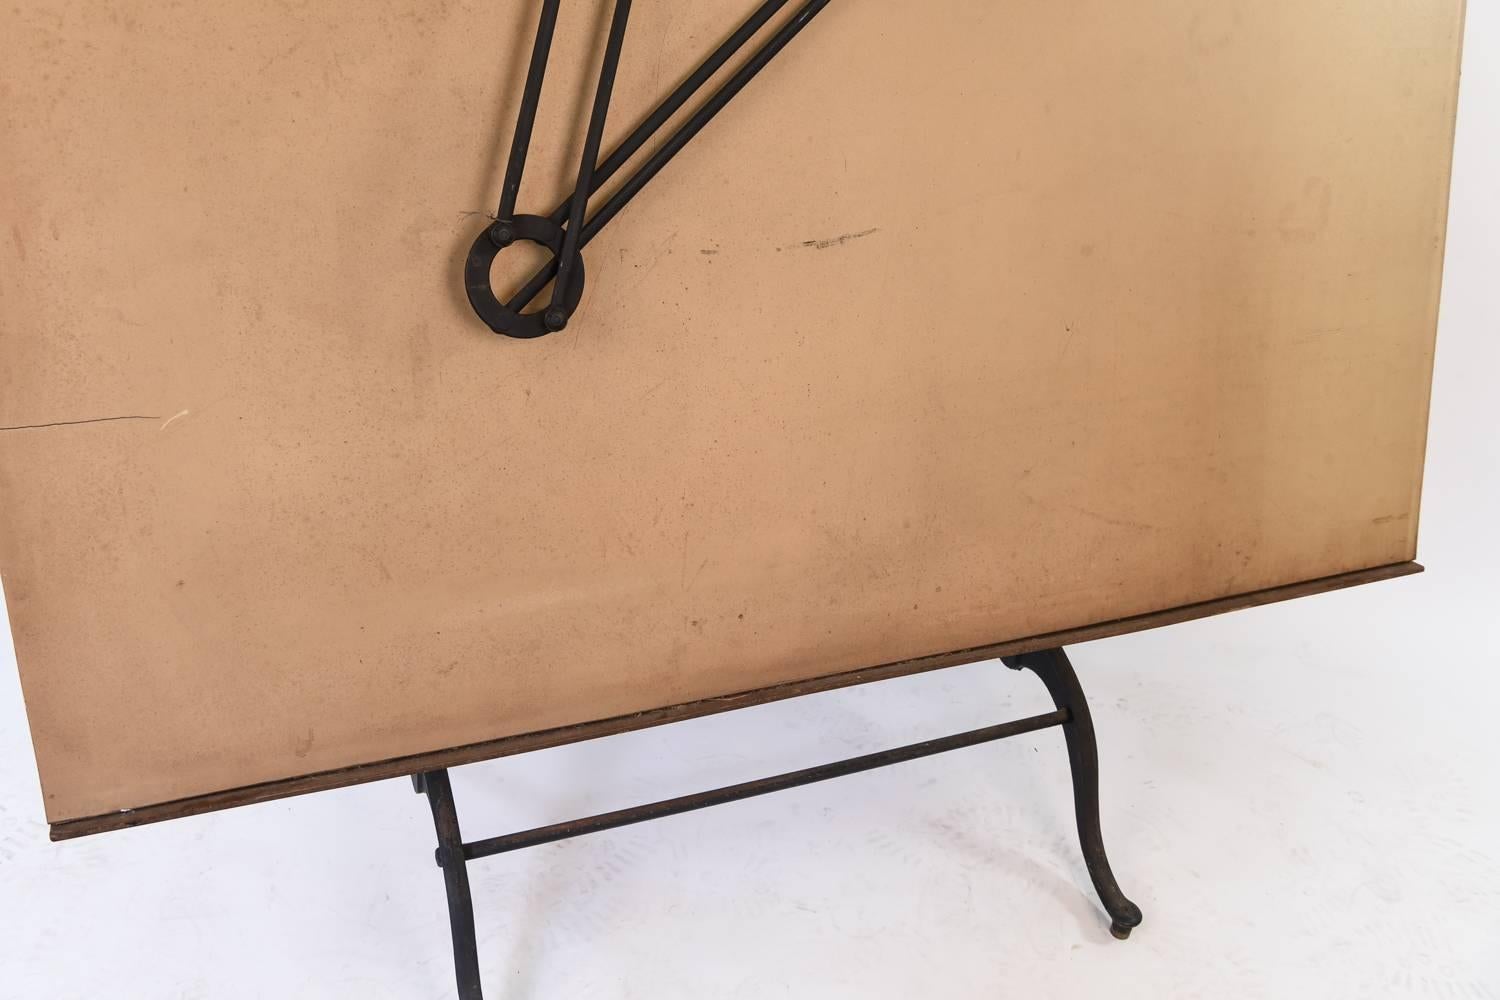 1930s Industrial Drafting Table with Cast Iron Adjustable Base 2